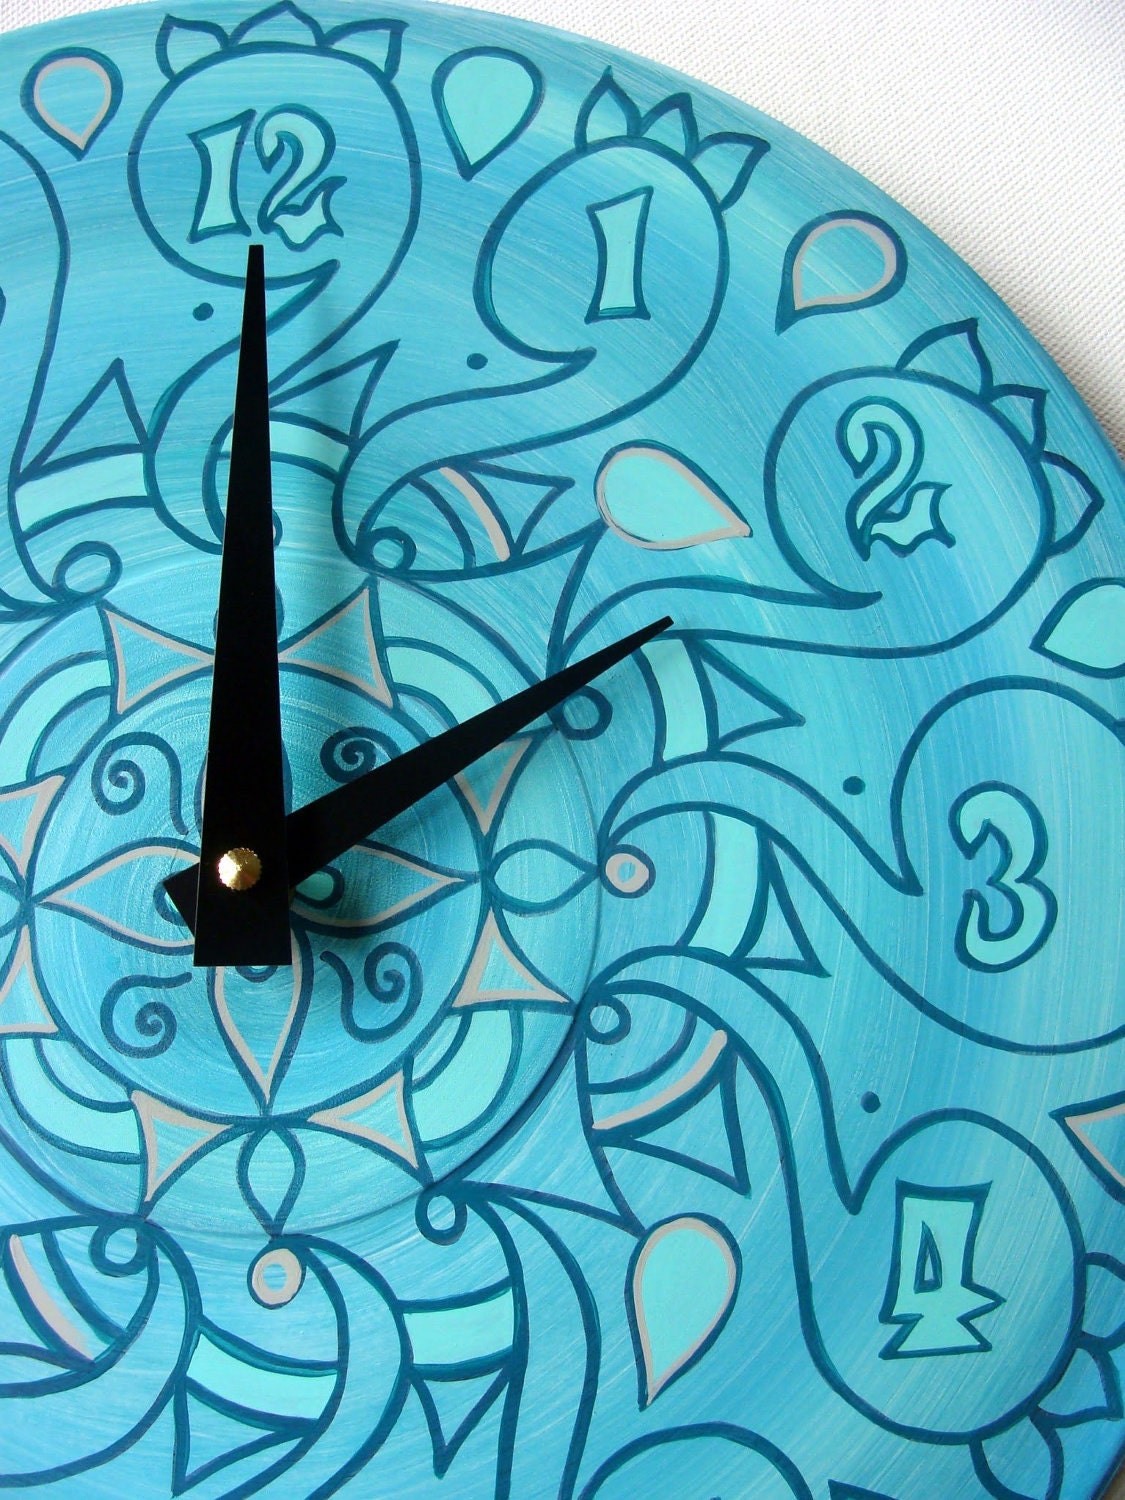 Cockatoo Teal Clock Geometric Pastel Home Decor Made by EyePopArt